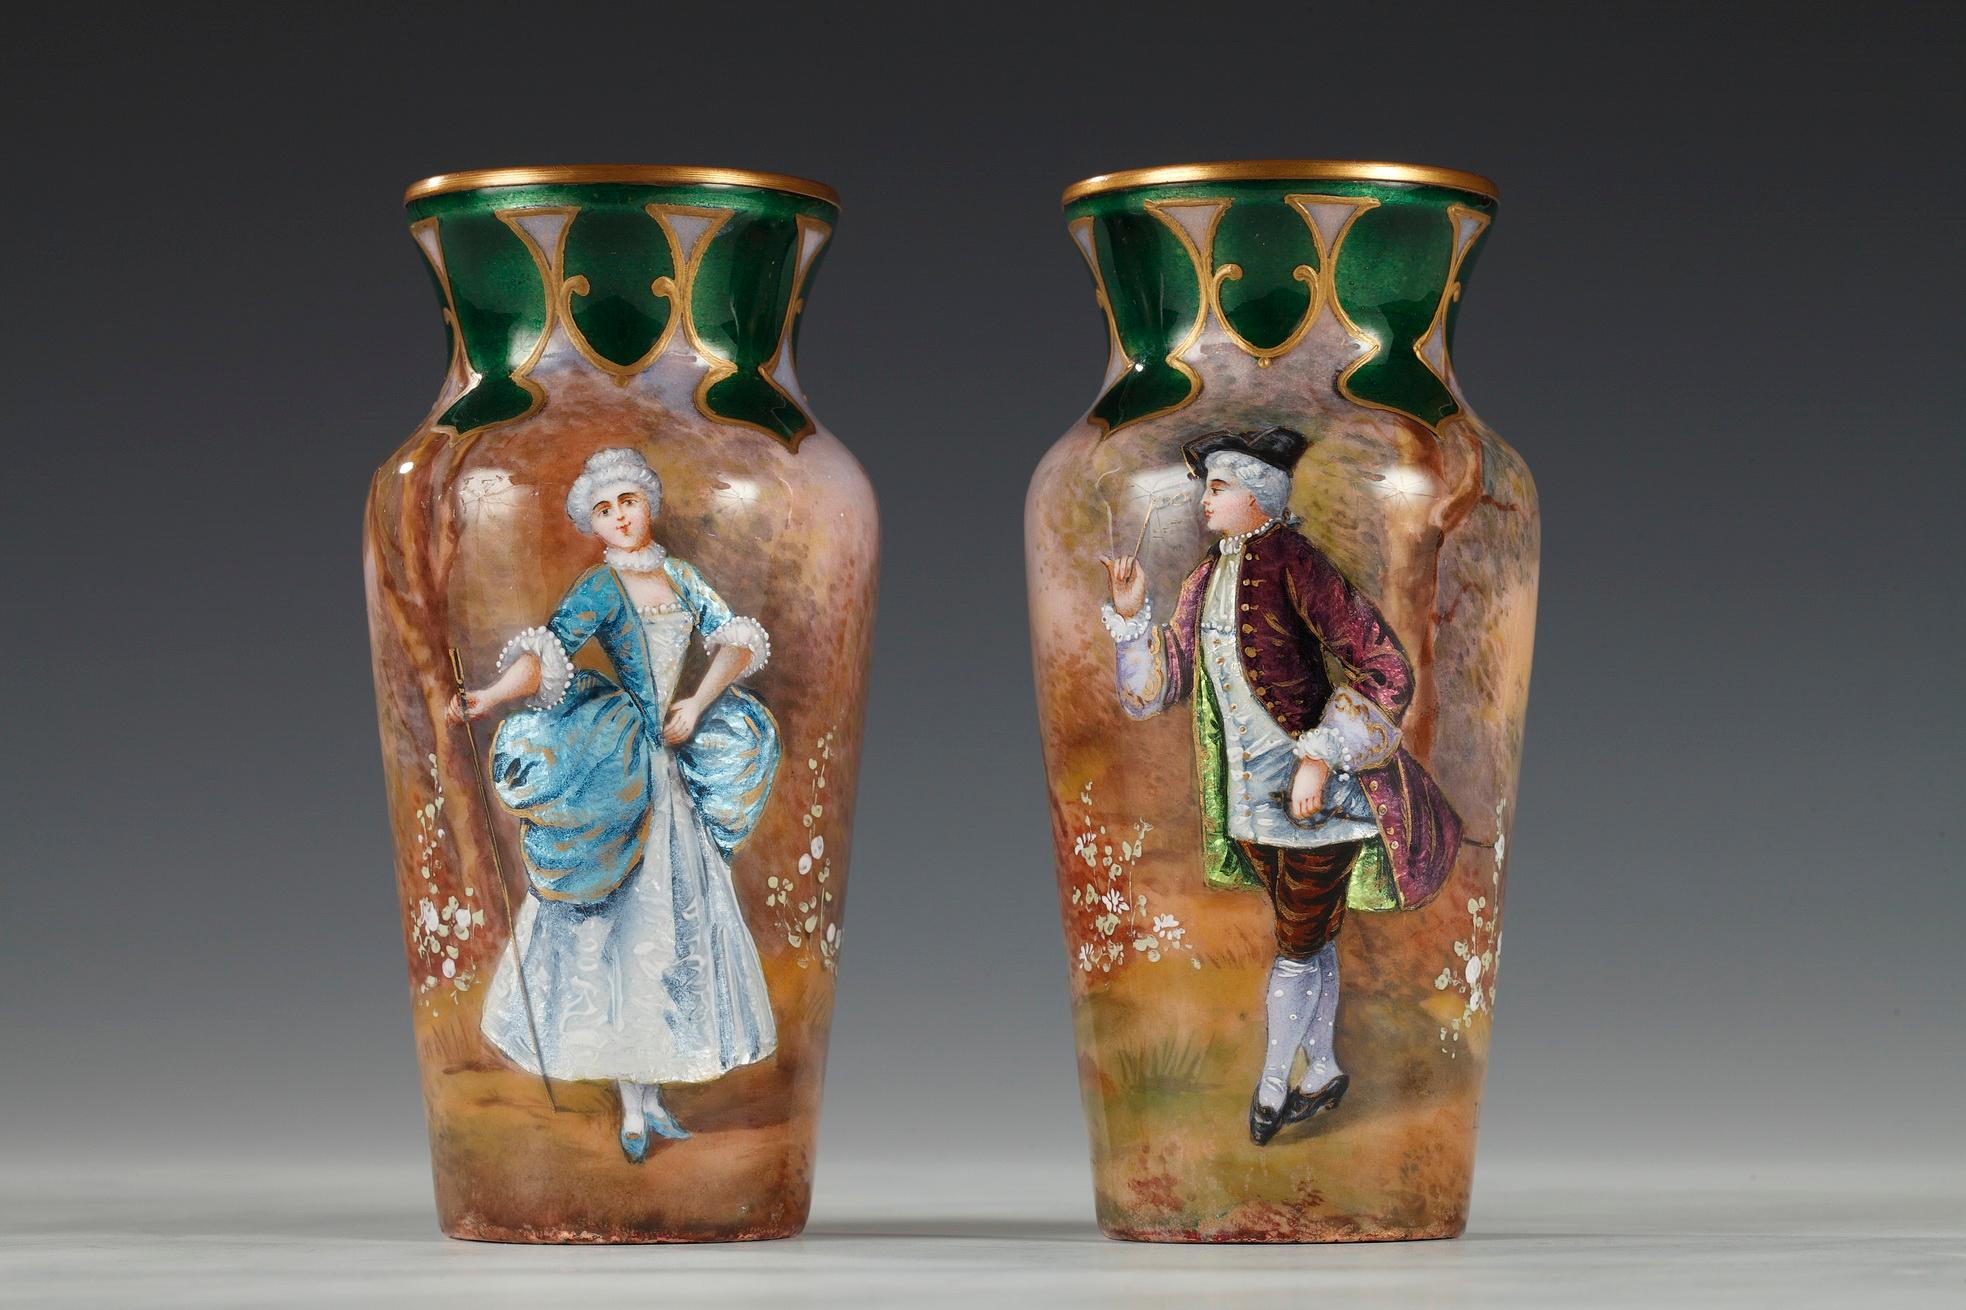 Charming pair of tight neck vases made in Limoges enamel on copper decors of galante scenes characters, the Marquis and Marquise.